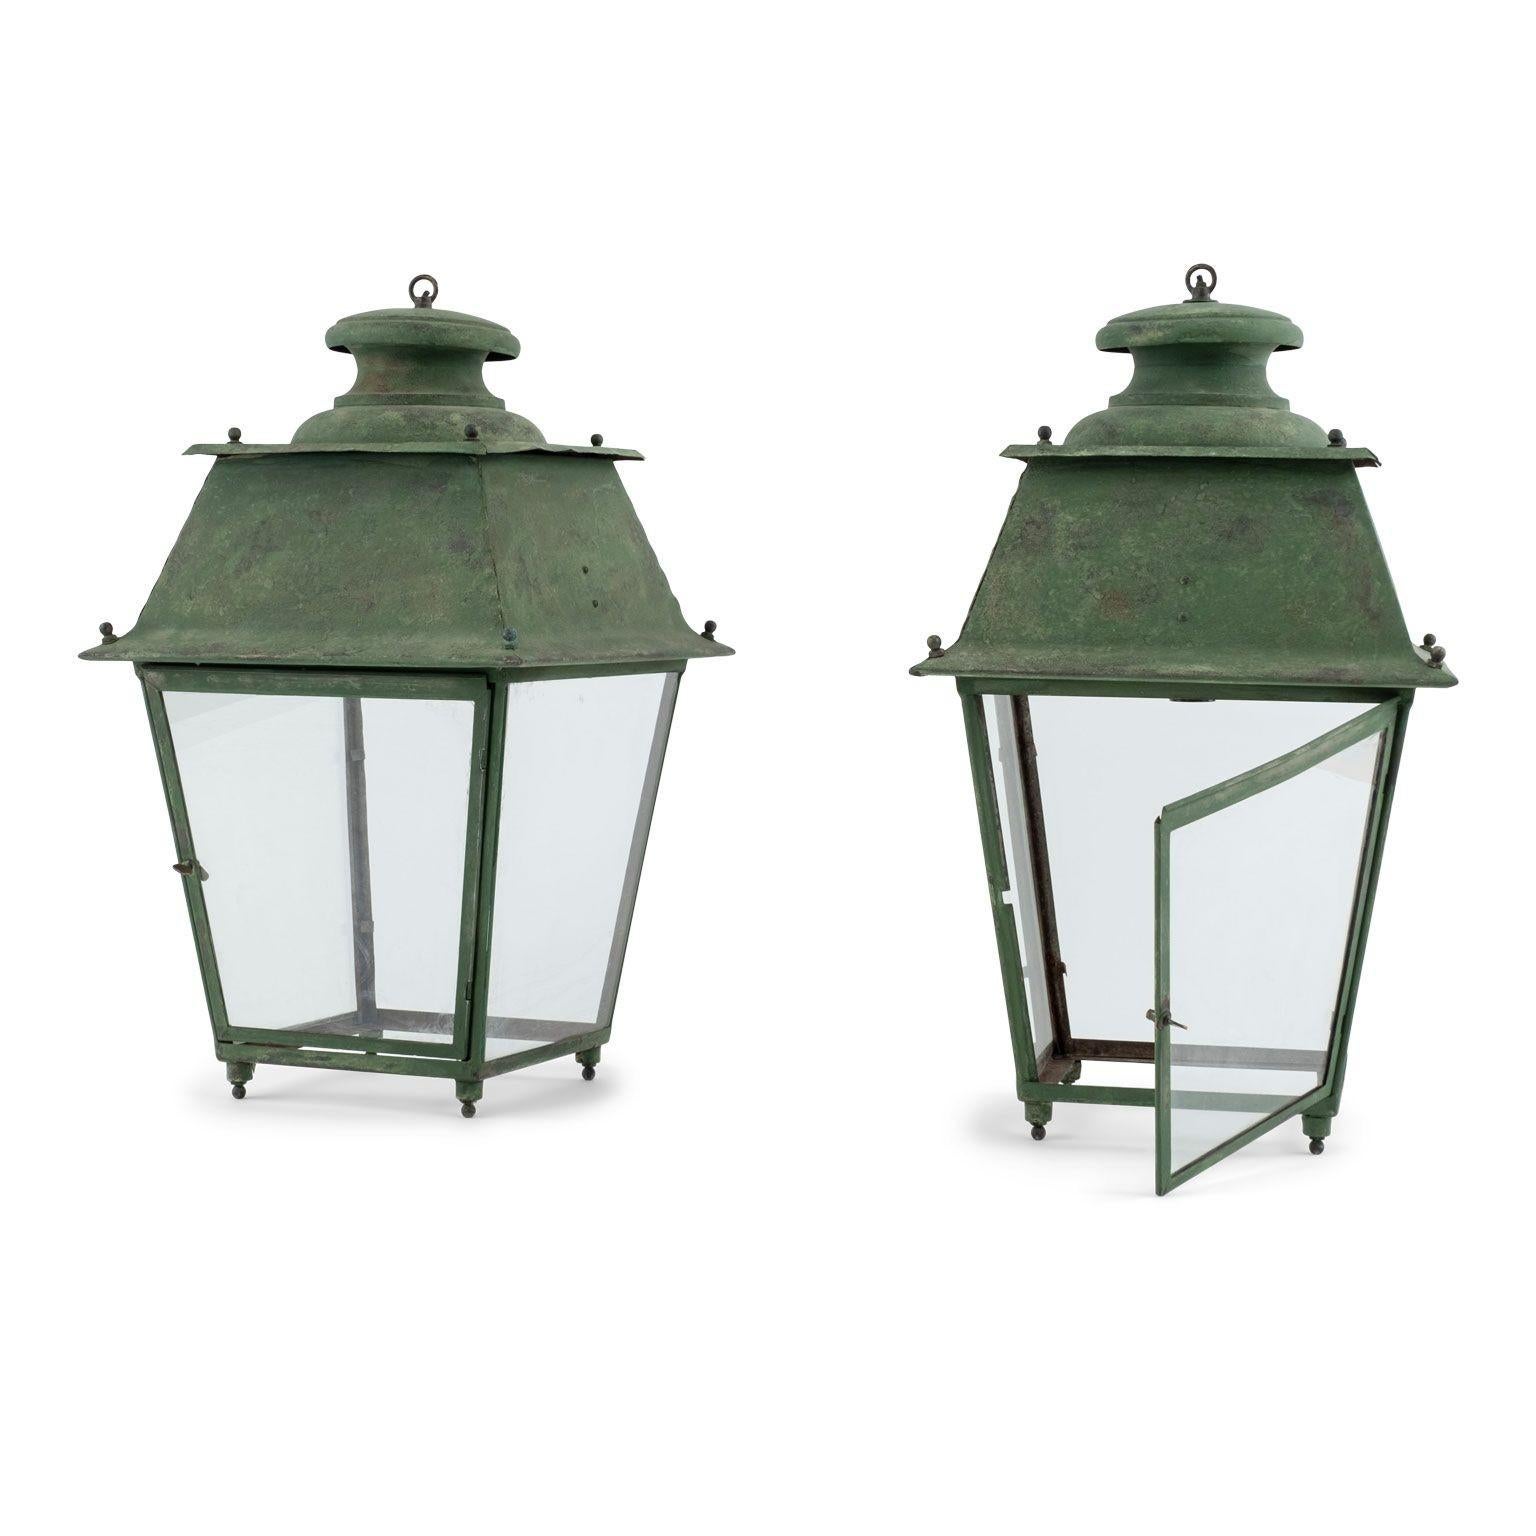 French Provincial Pair of Green-Verdigris Copper French Lanterns